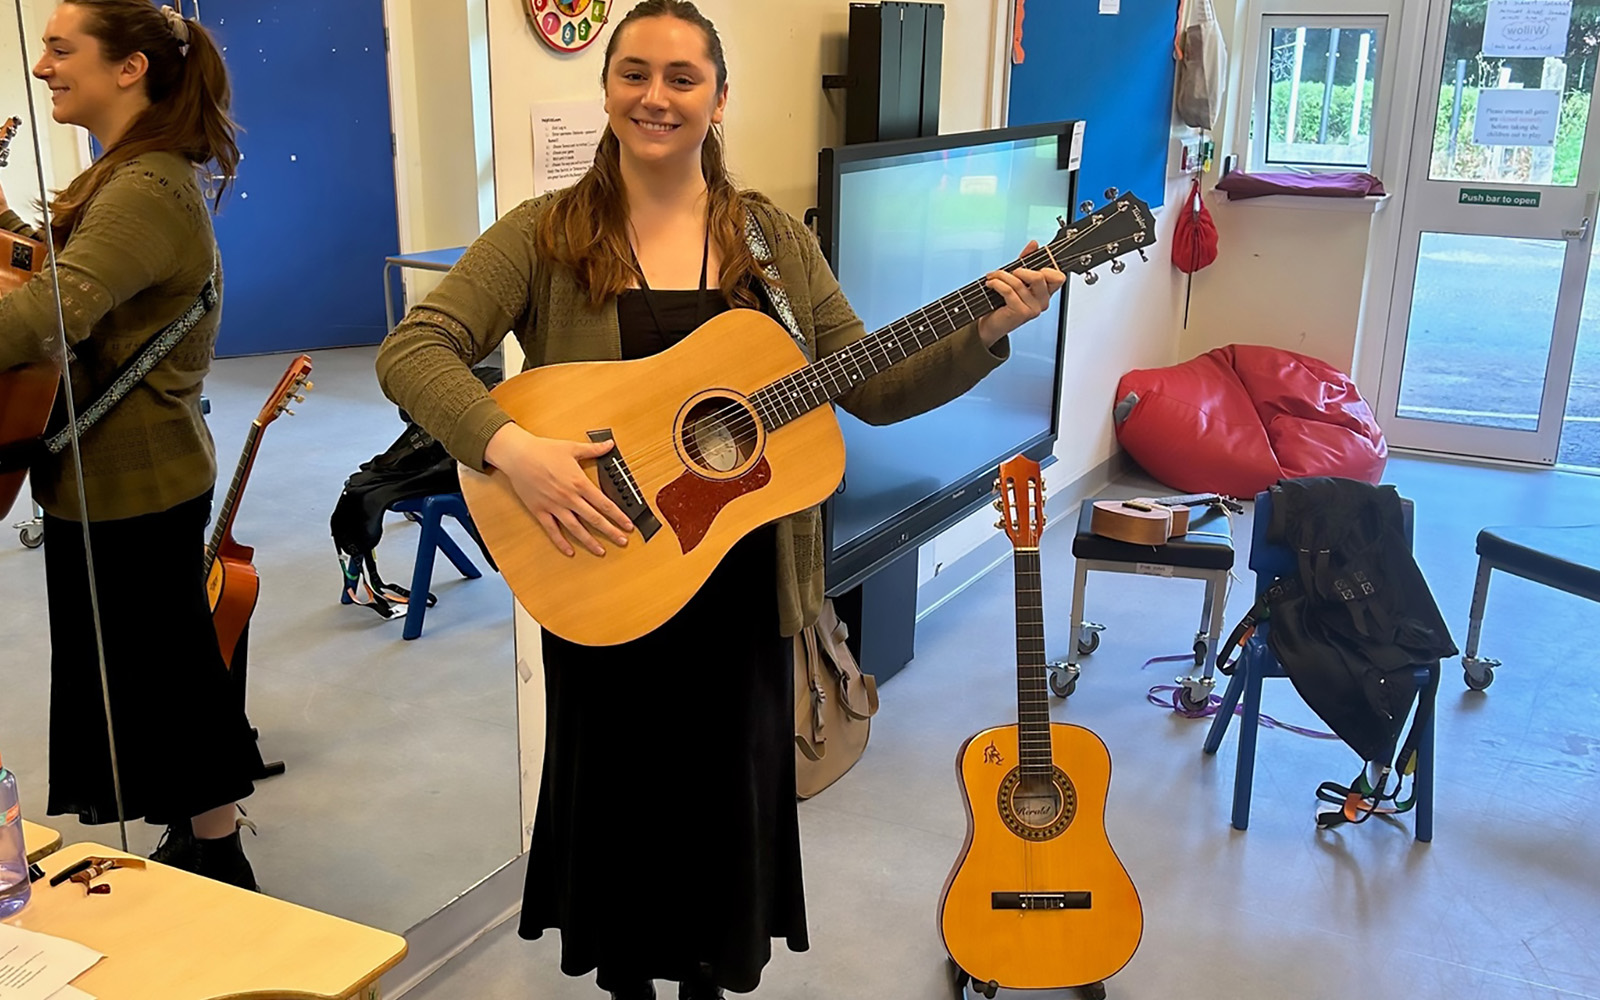 Musician Liv Dawn stands in a brightly lit room, with a guitar in her arms, and one in a stand on the floor next to her. Around her are tall mirrors, a large TV, bean bags, instruments and desks.